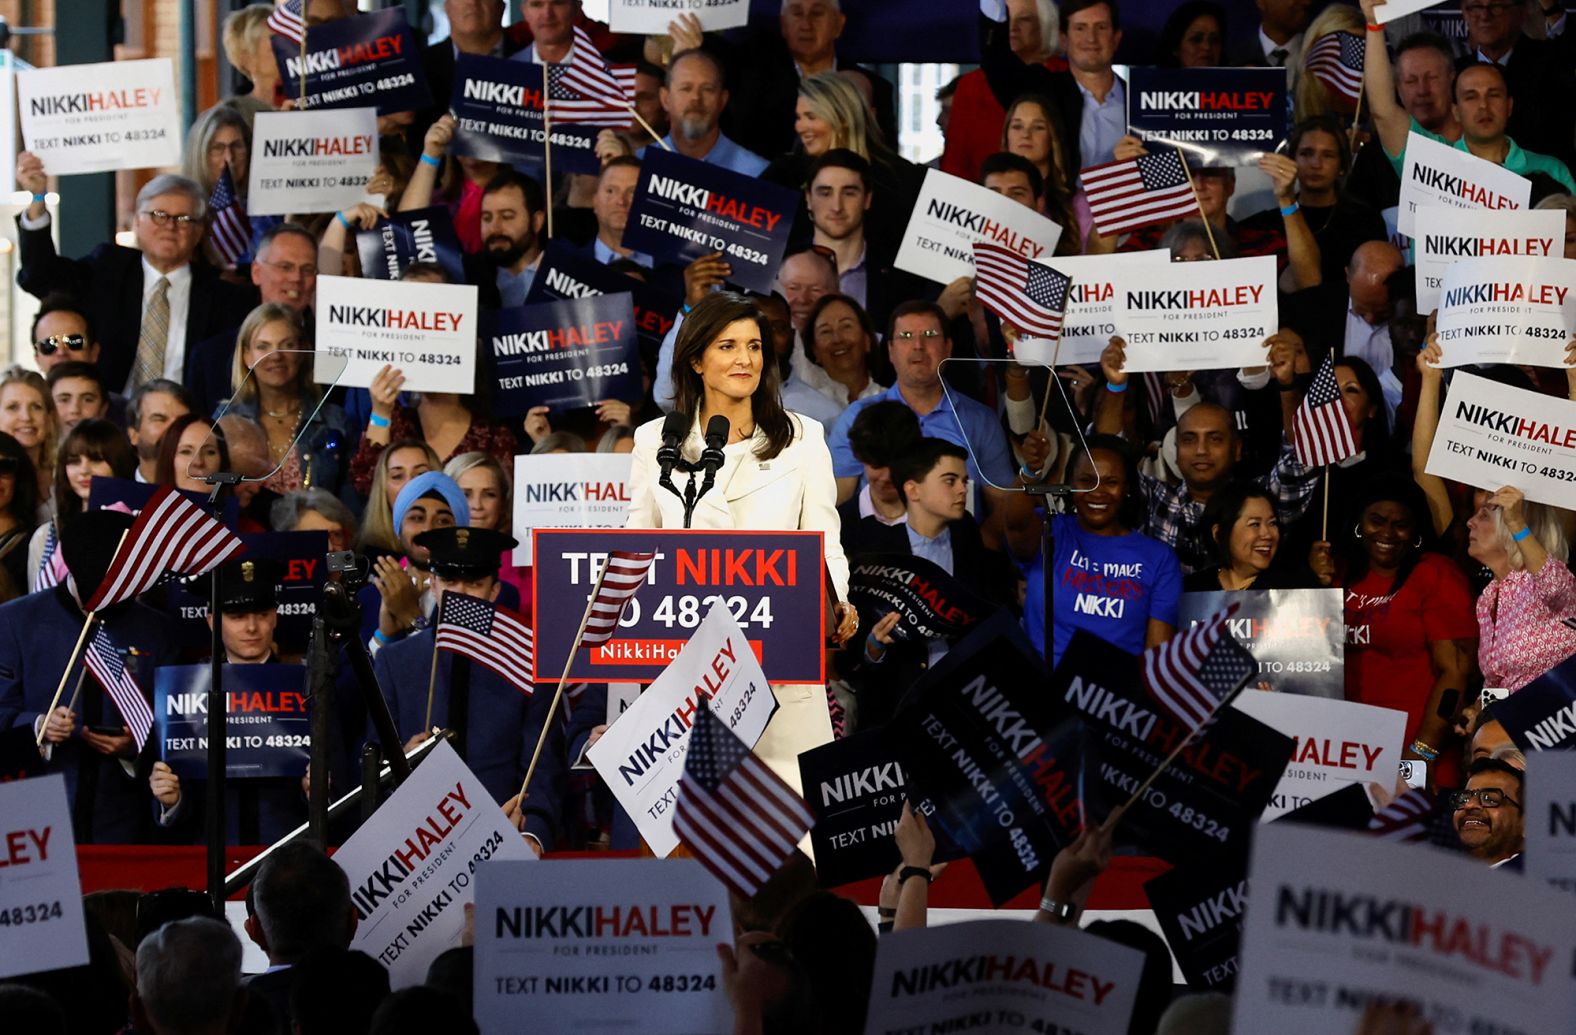 Haley speaks in Charleston, South Carolina, in February 2023, a day after announcing her presidential run. She touted her record in government and <a href="index.php?page=&url=https%3A%2F%2Fwww.cnn.com%2F2023%2F02%2F15%2Fpolitics%2Fnikki-haley-2024-charleston%2Findex.html" target="_blank">laid out her vision</a> for what she described as a "strong America, full of opportunity that lifts up everyone, not just a select few."